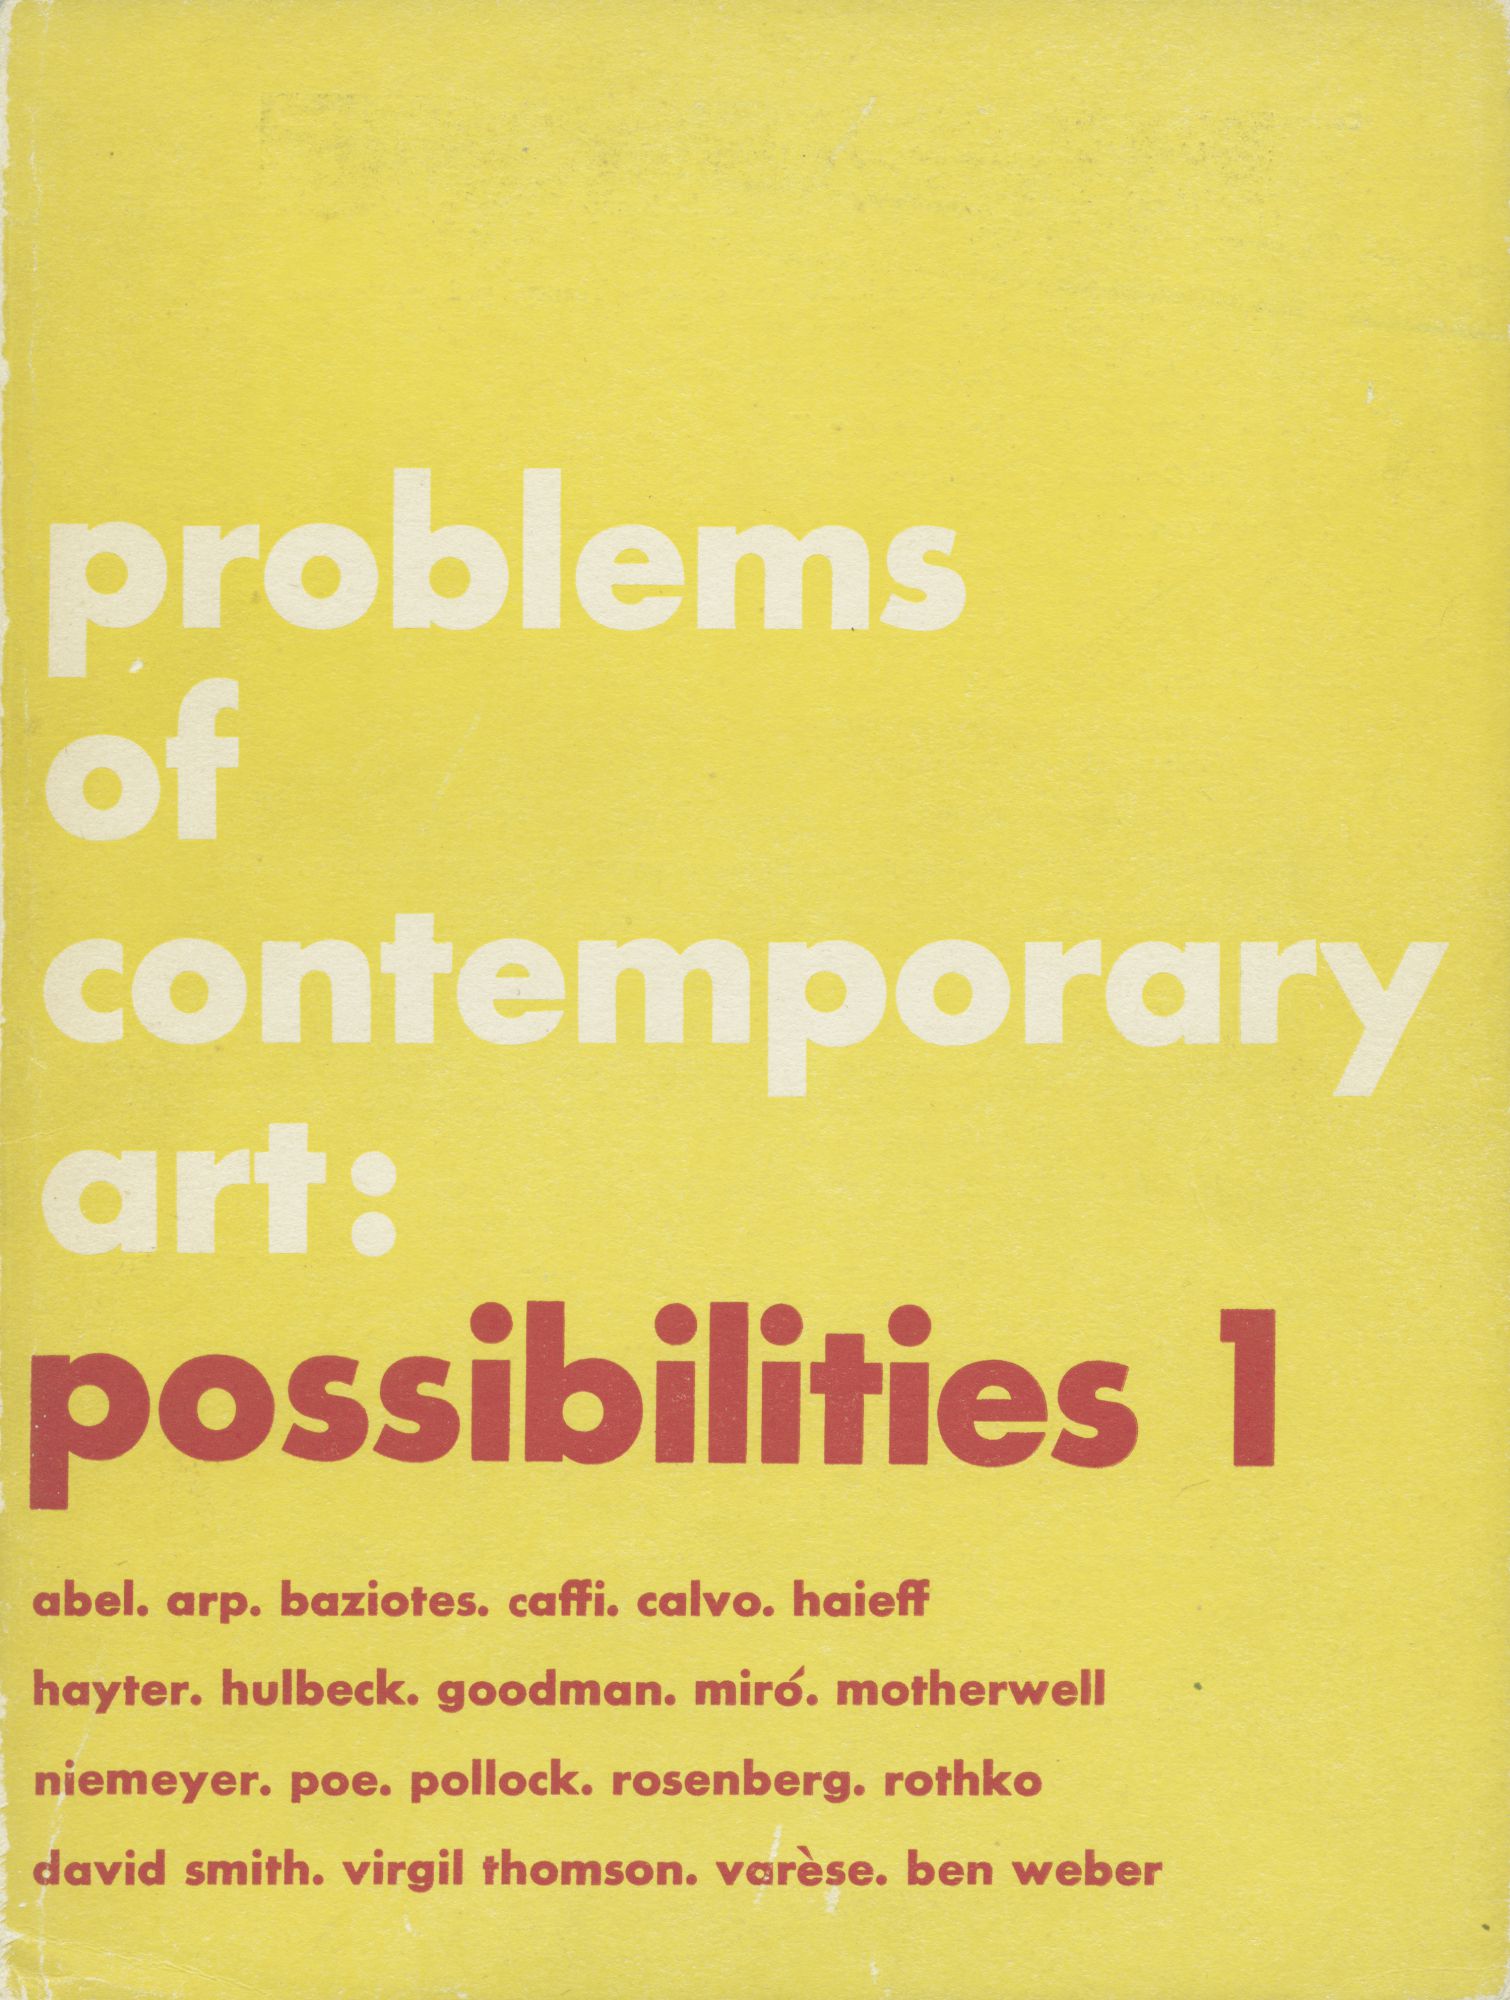 Motherwell’s copy of Possibilities: An Occasional Review